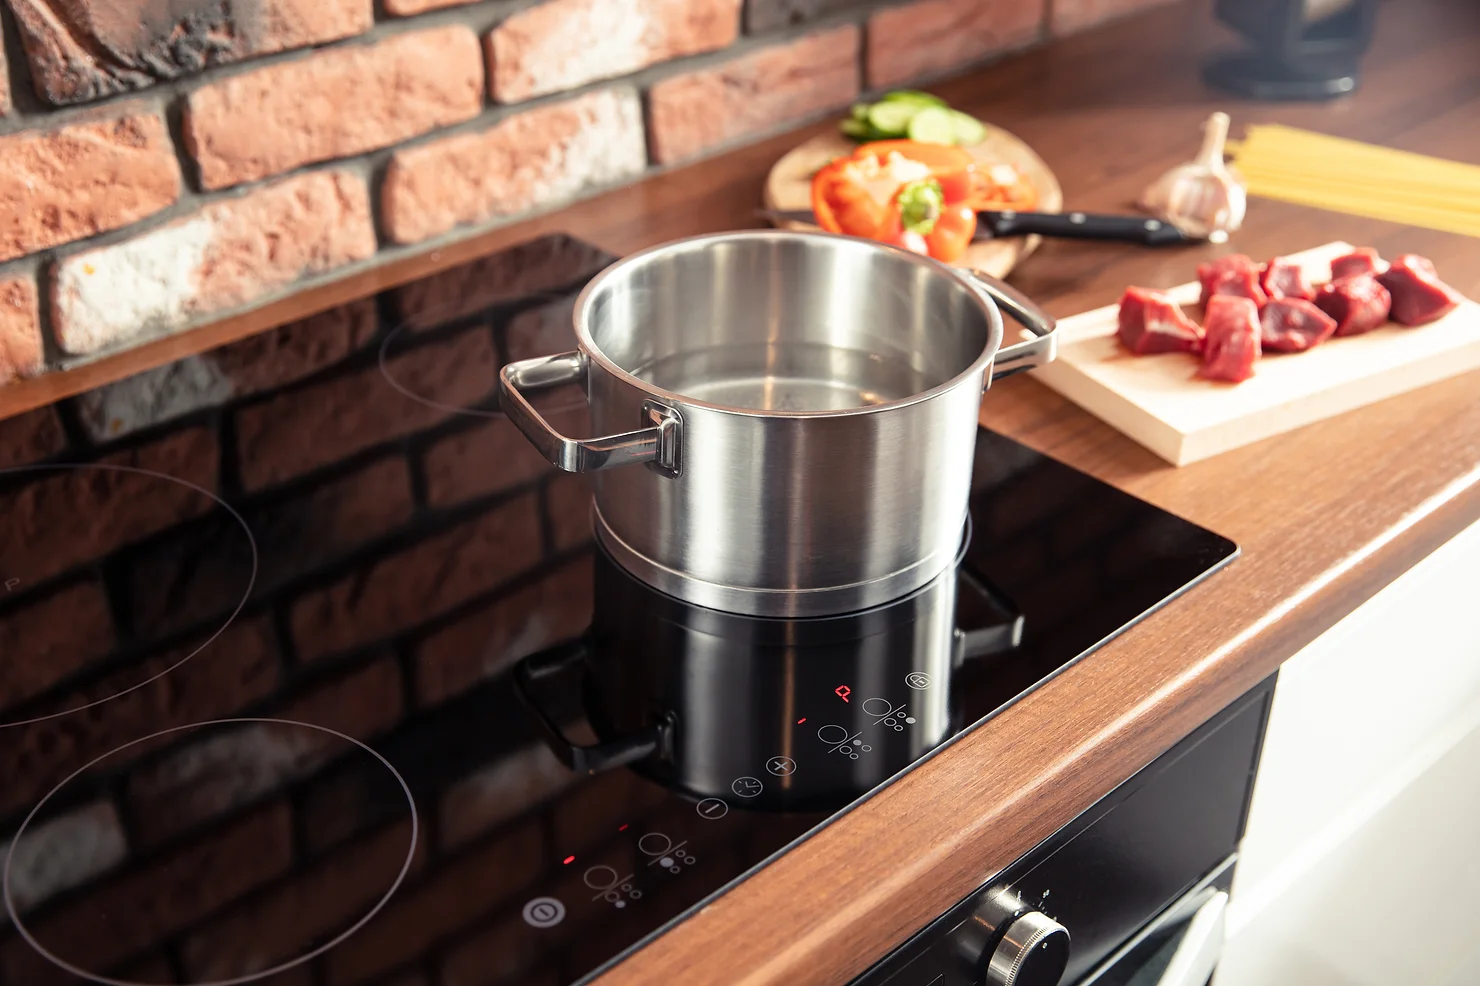 A stainless steel pot sits on an induction stove top in a kitchen with brick walls, beside ingredients like vegetables and meat.